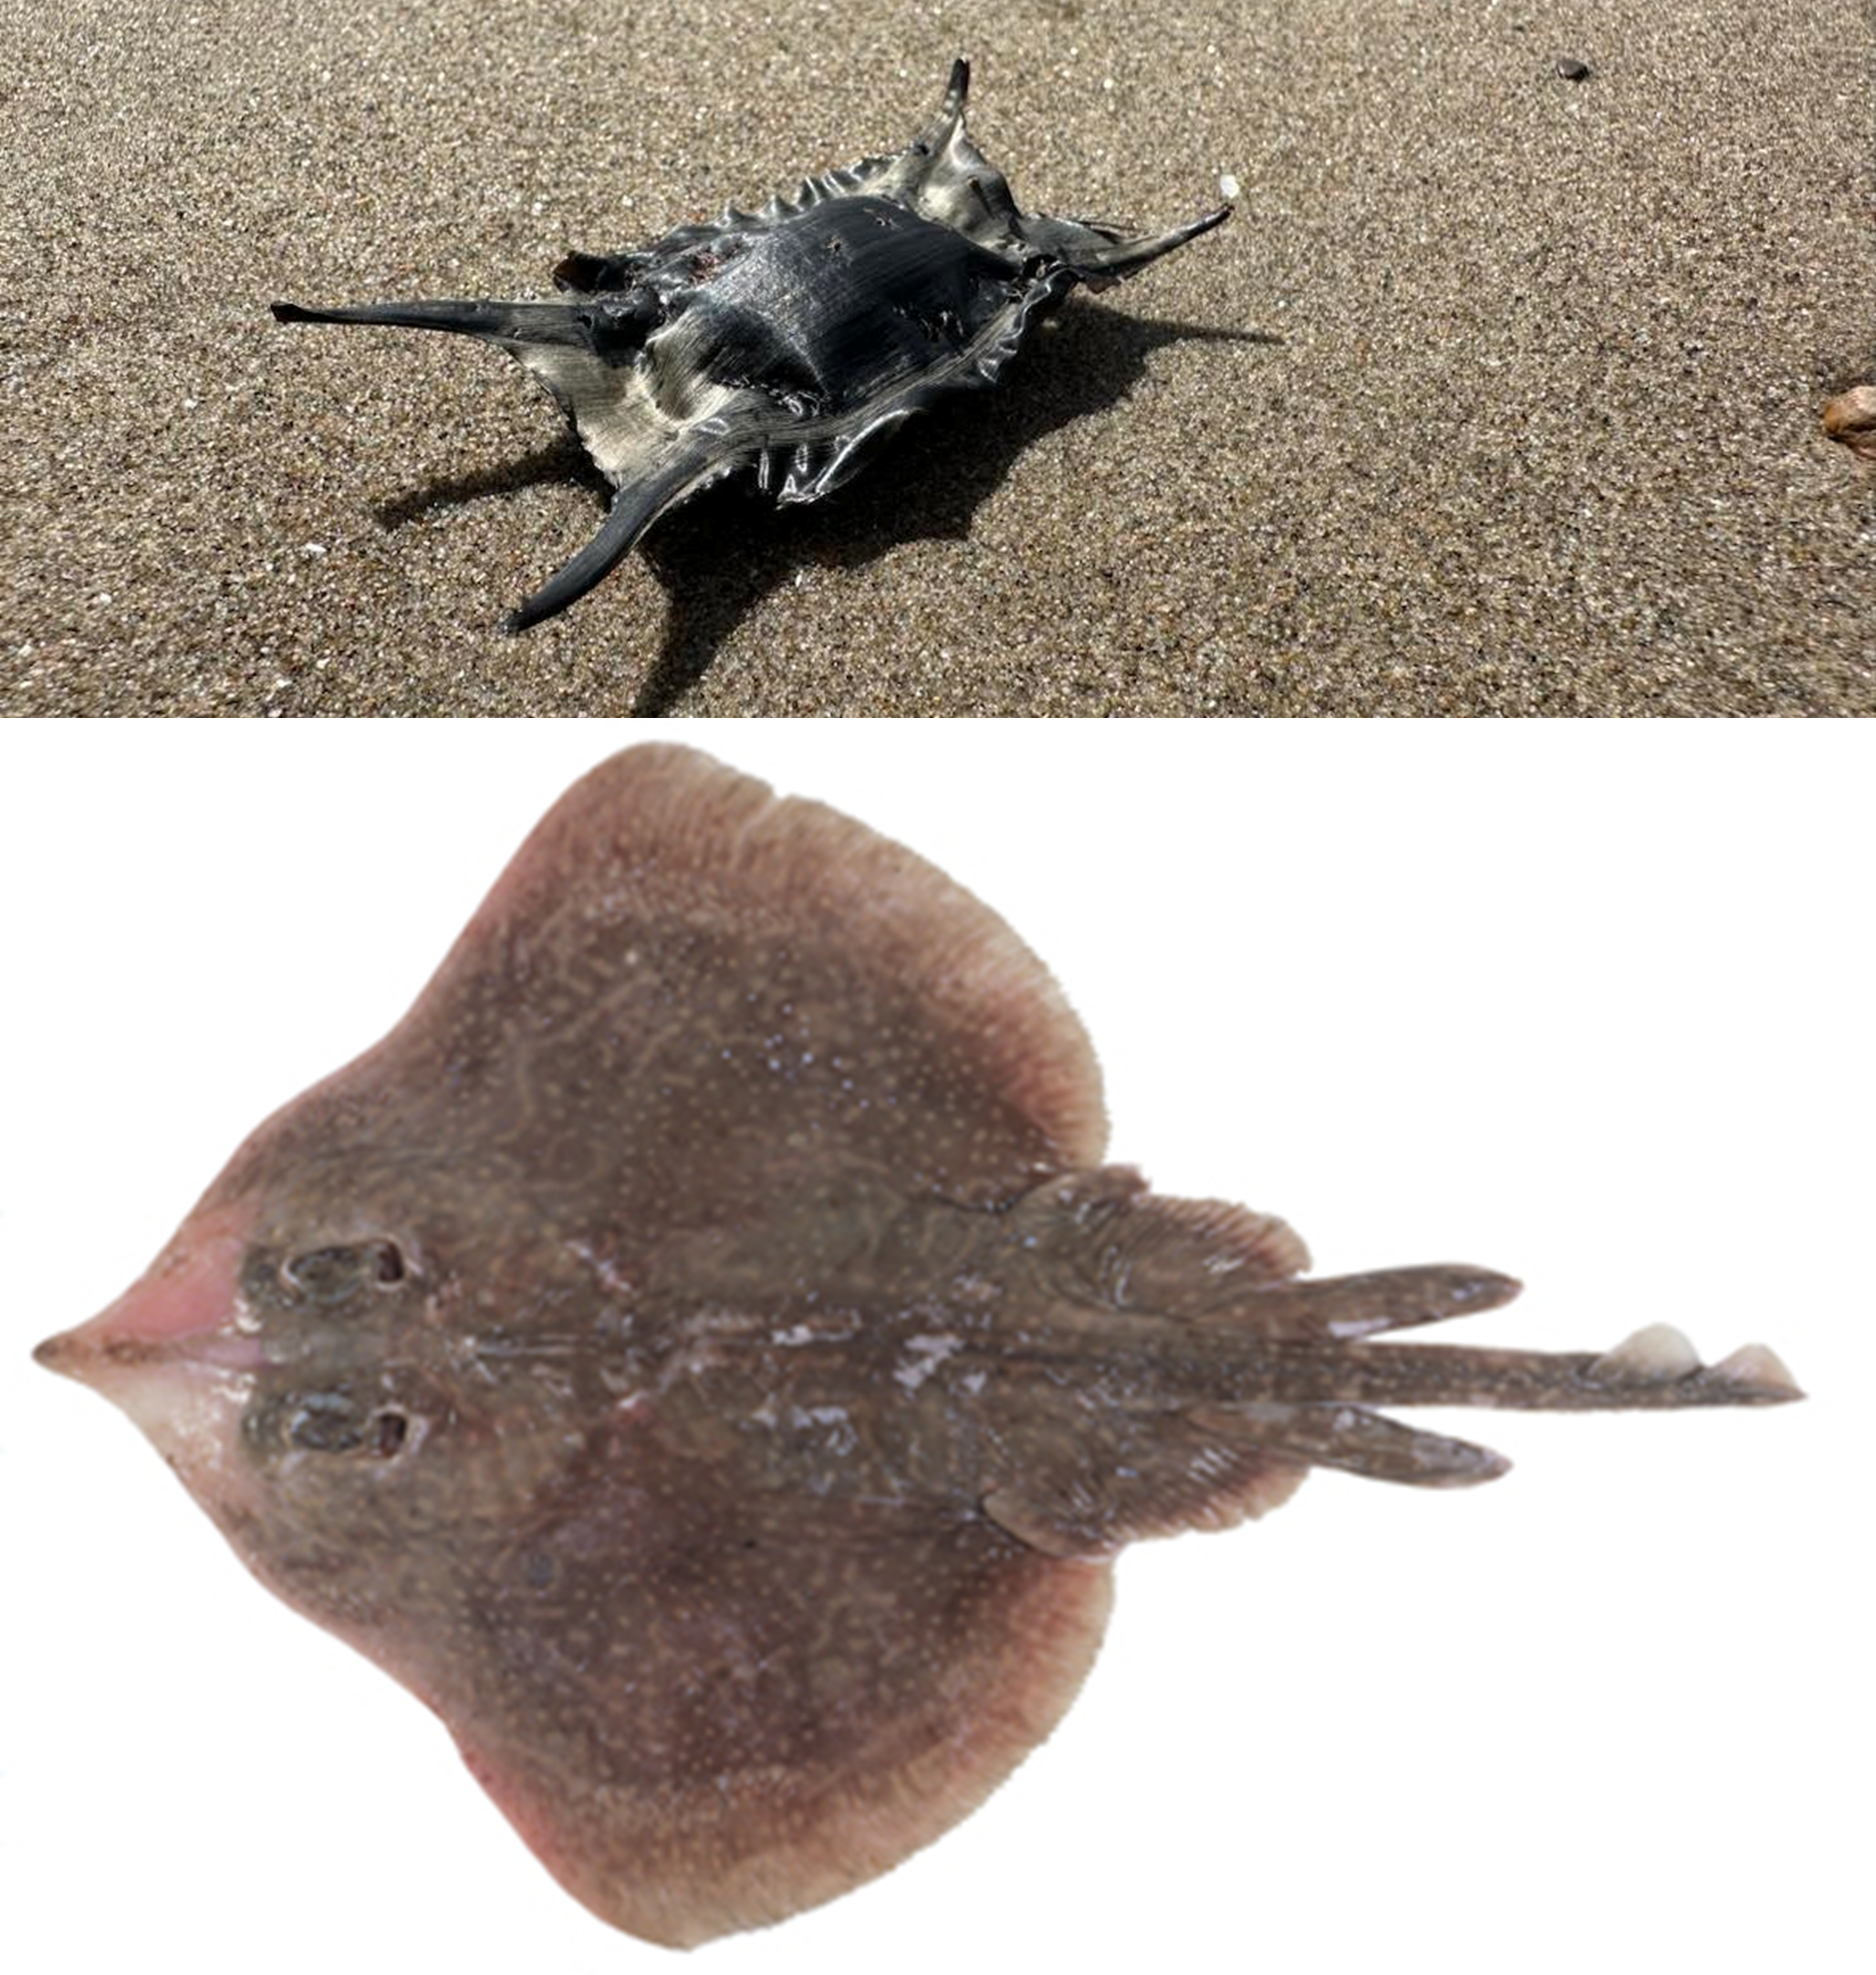 Pictuire of an eggcase on beach and picture of dead skate from above